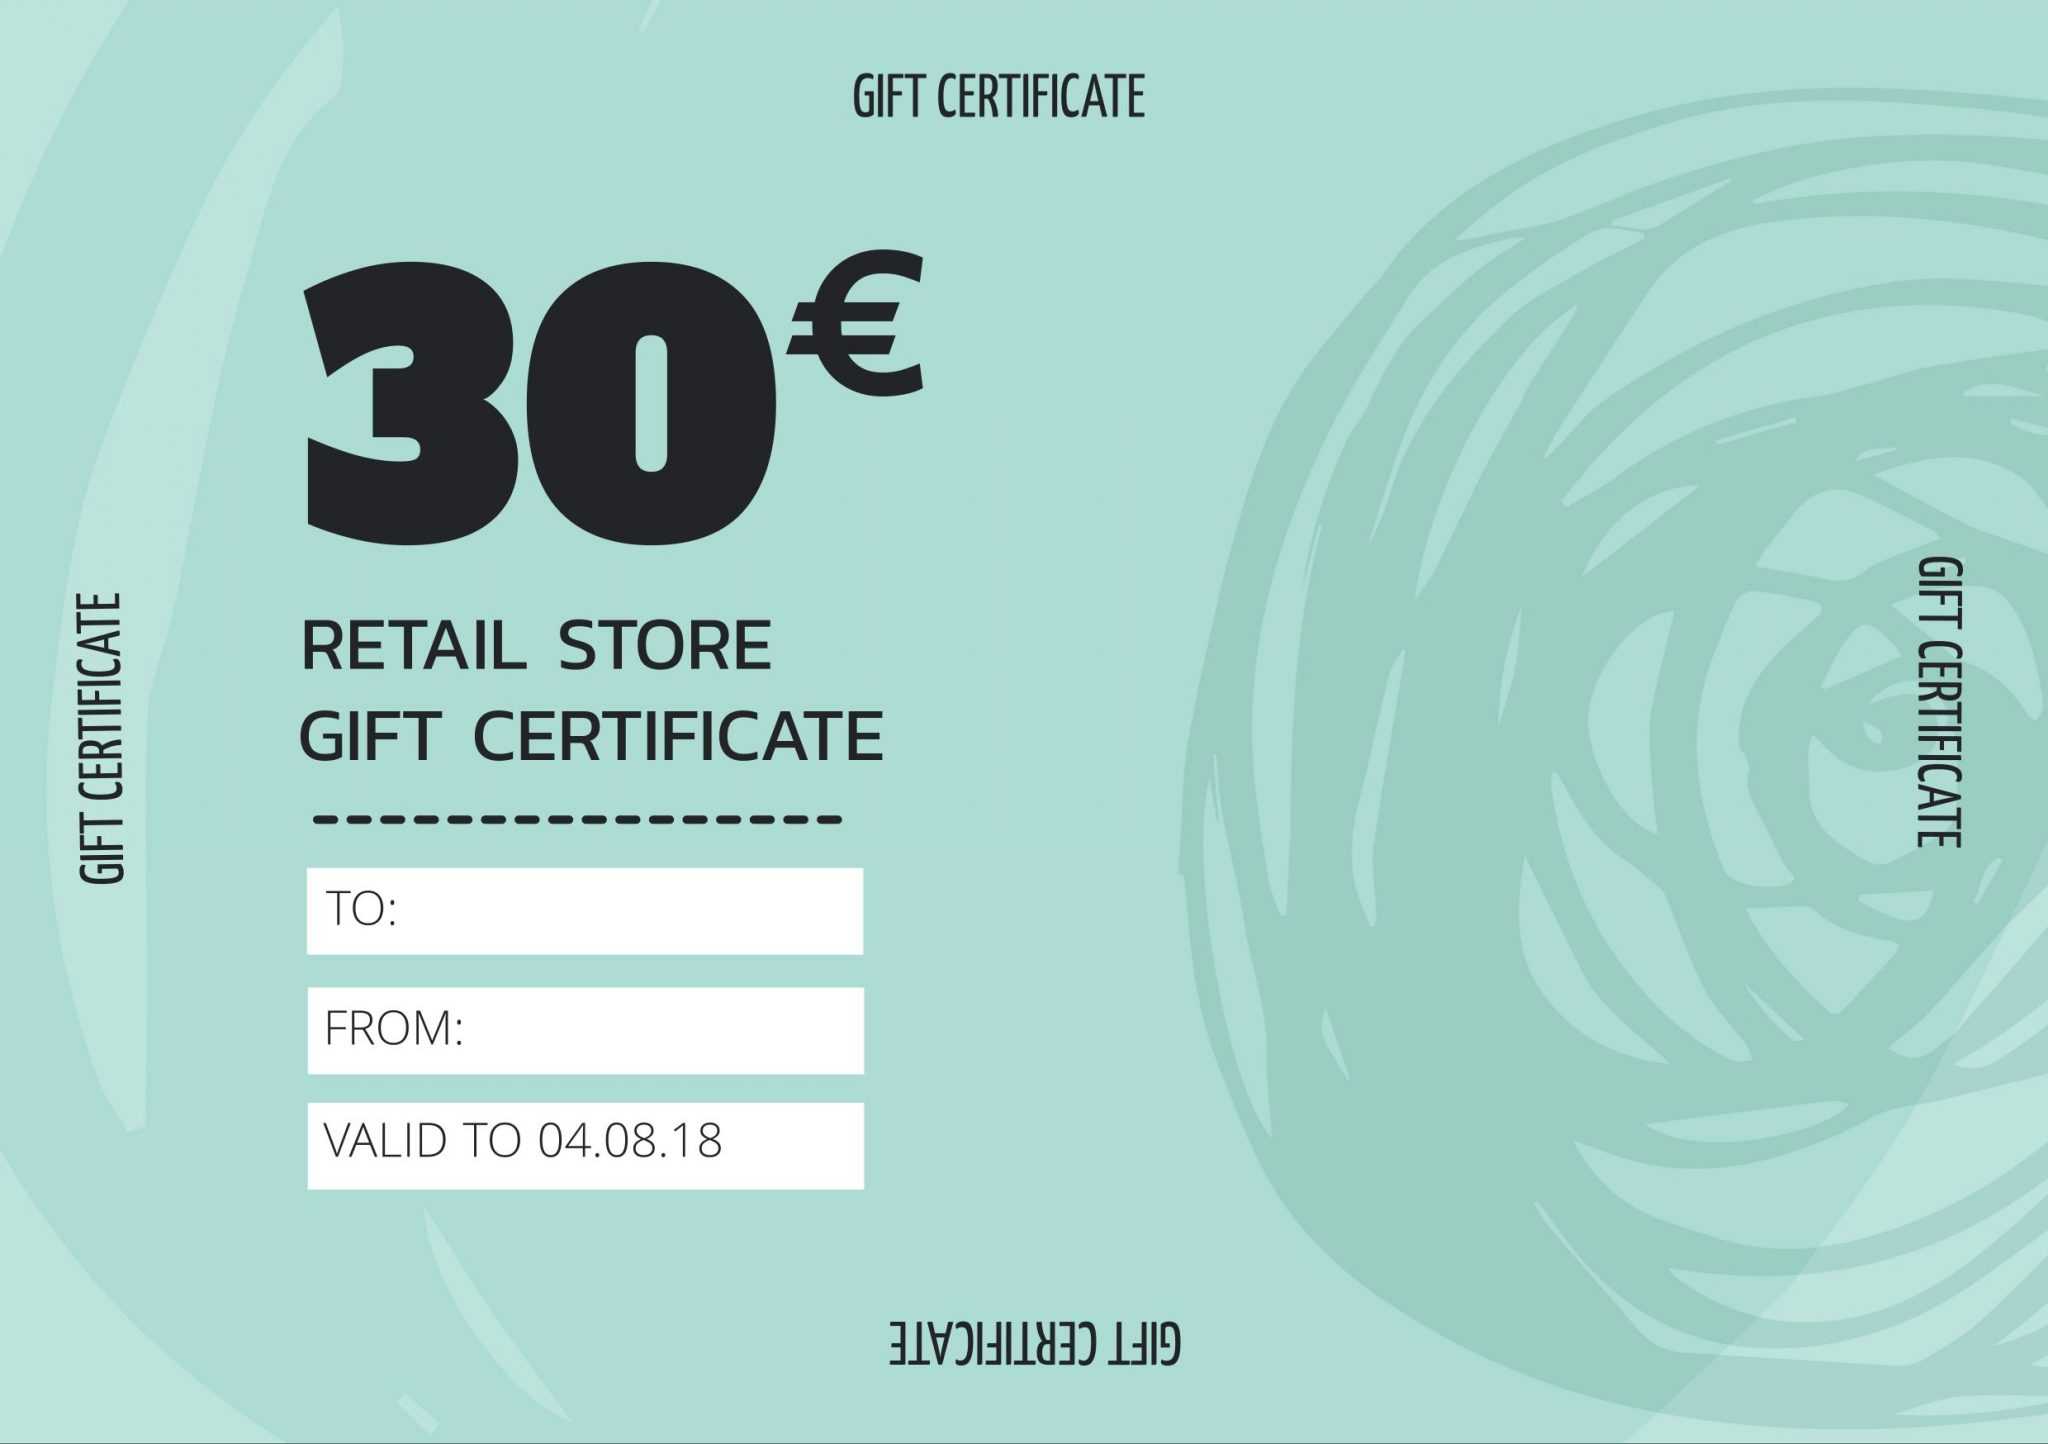 Create Personalized Gift Certificate Templates & Vouchers Throughout Restaurant Gift Certificate Template